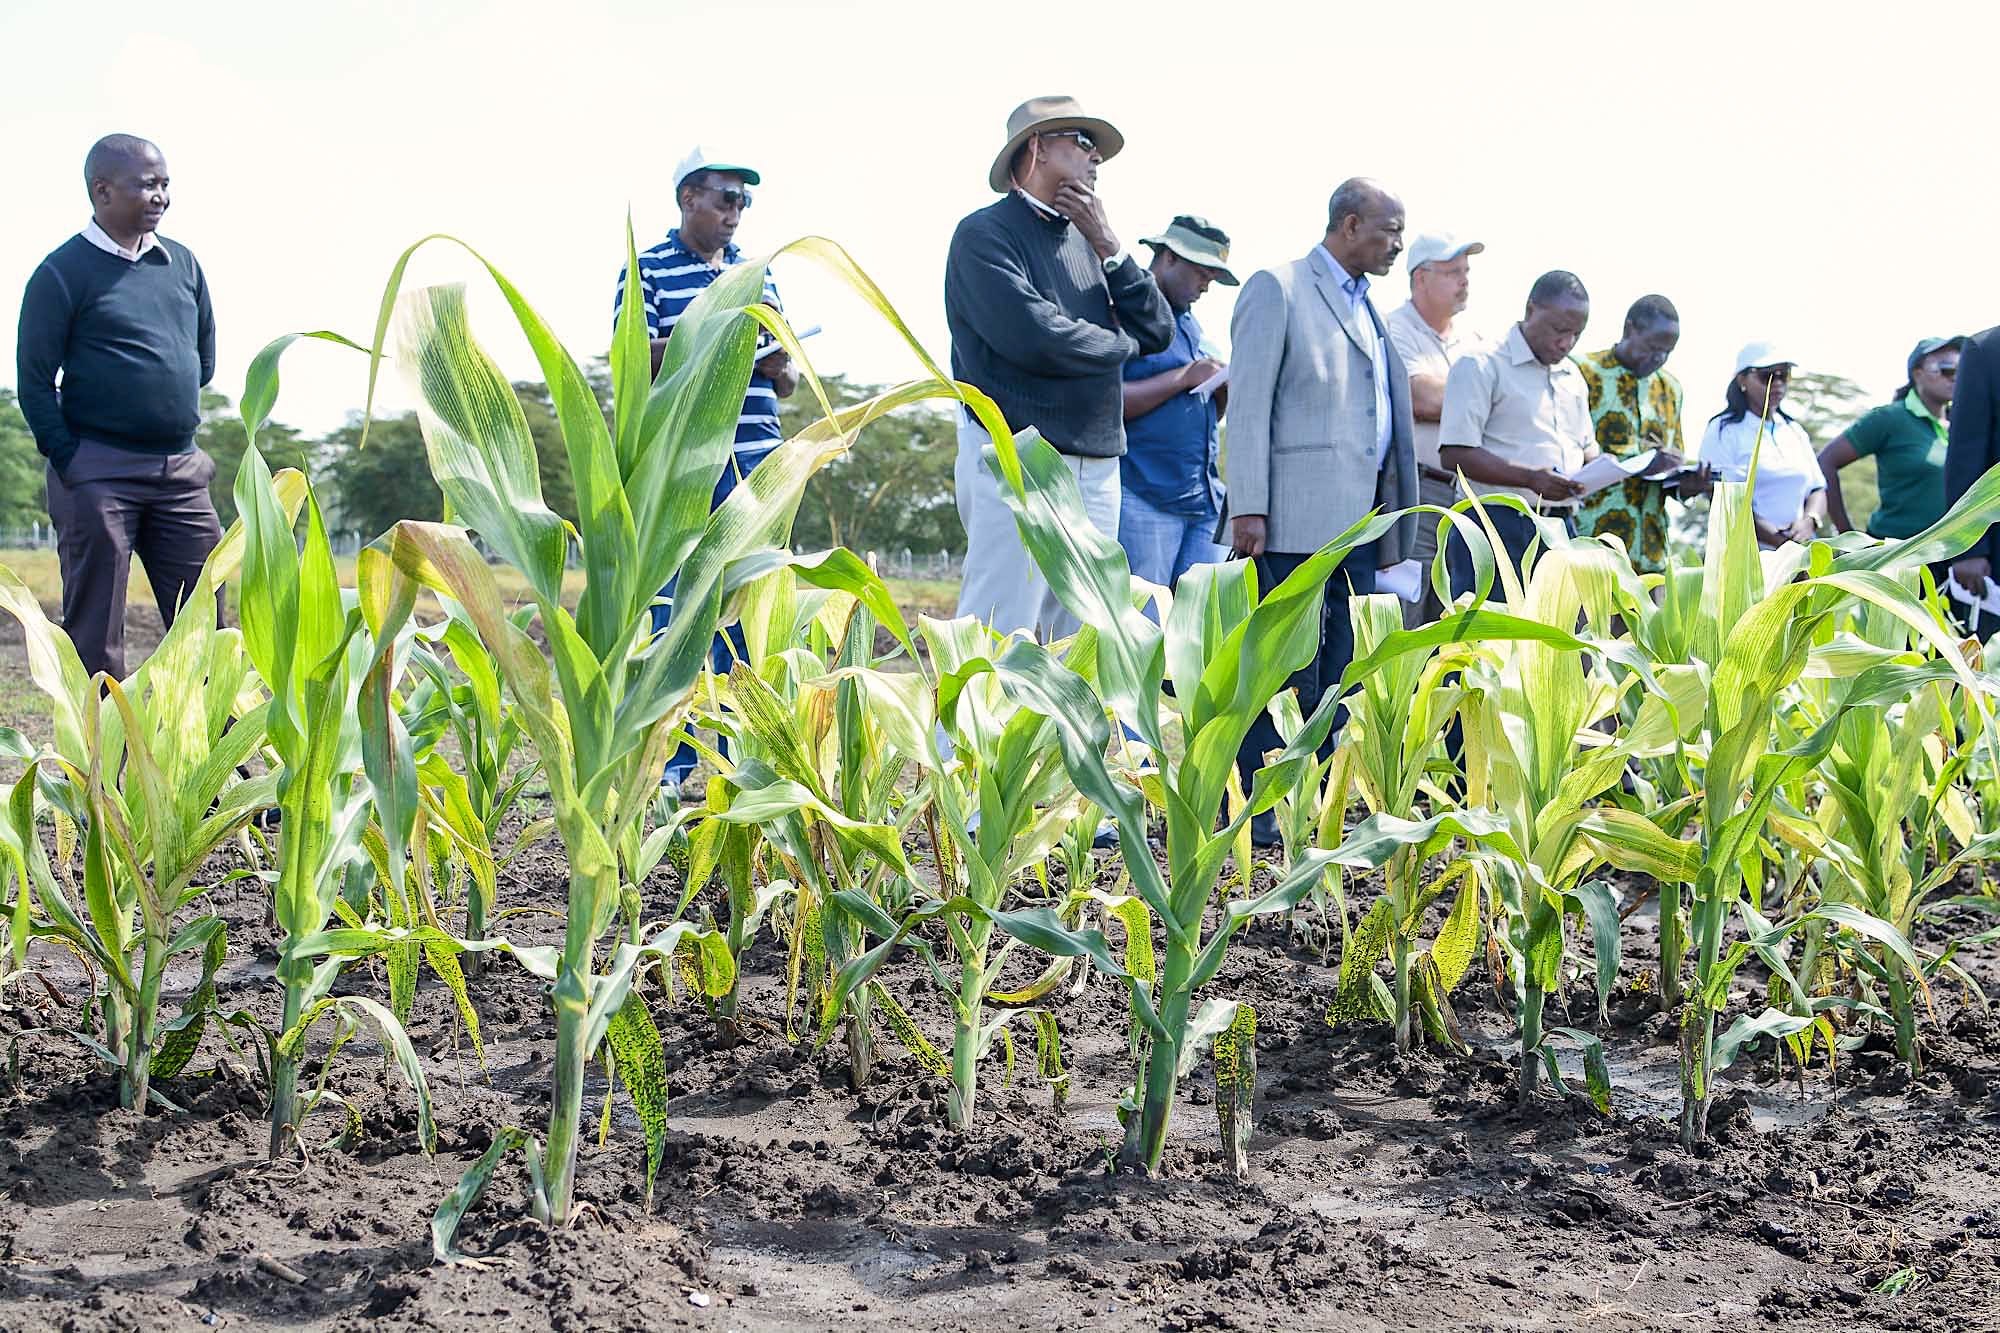 Researchers and visitors listen to explanations during a tour of infected maize fields at the MLN screening facility in Naivasha, Kenya. (Photo: CIMMYT)